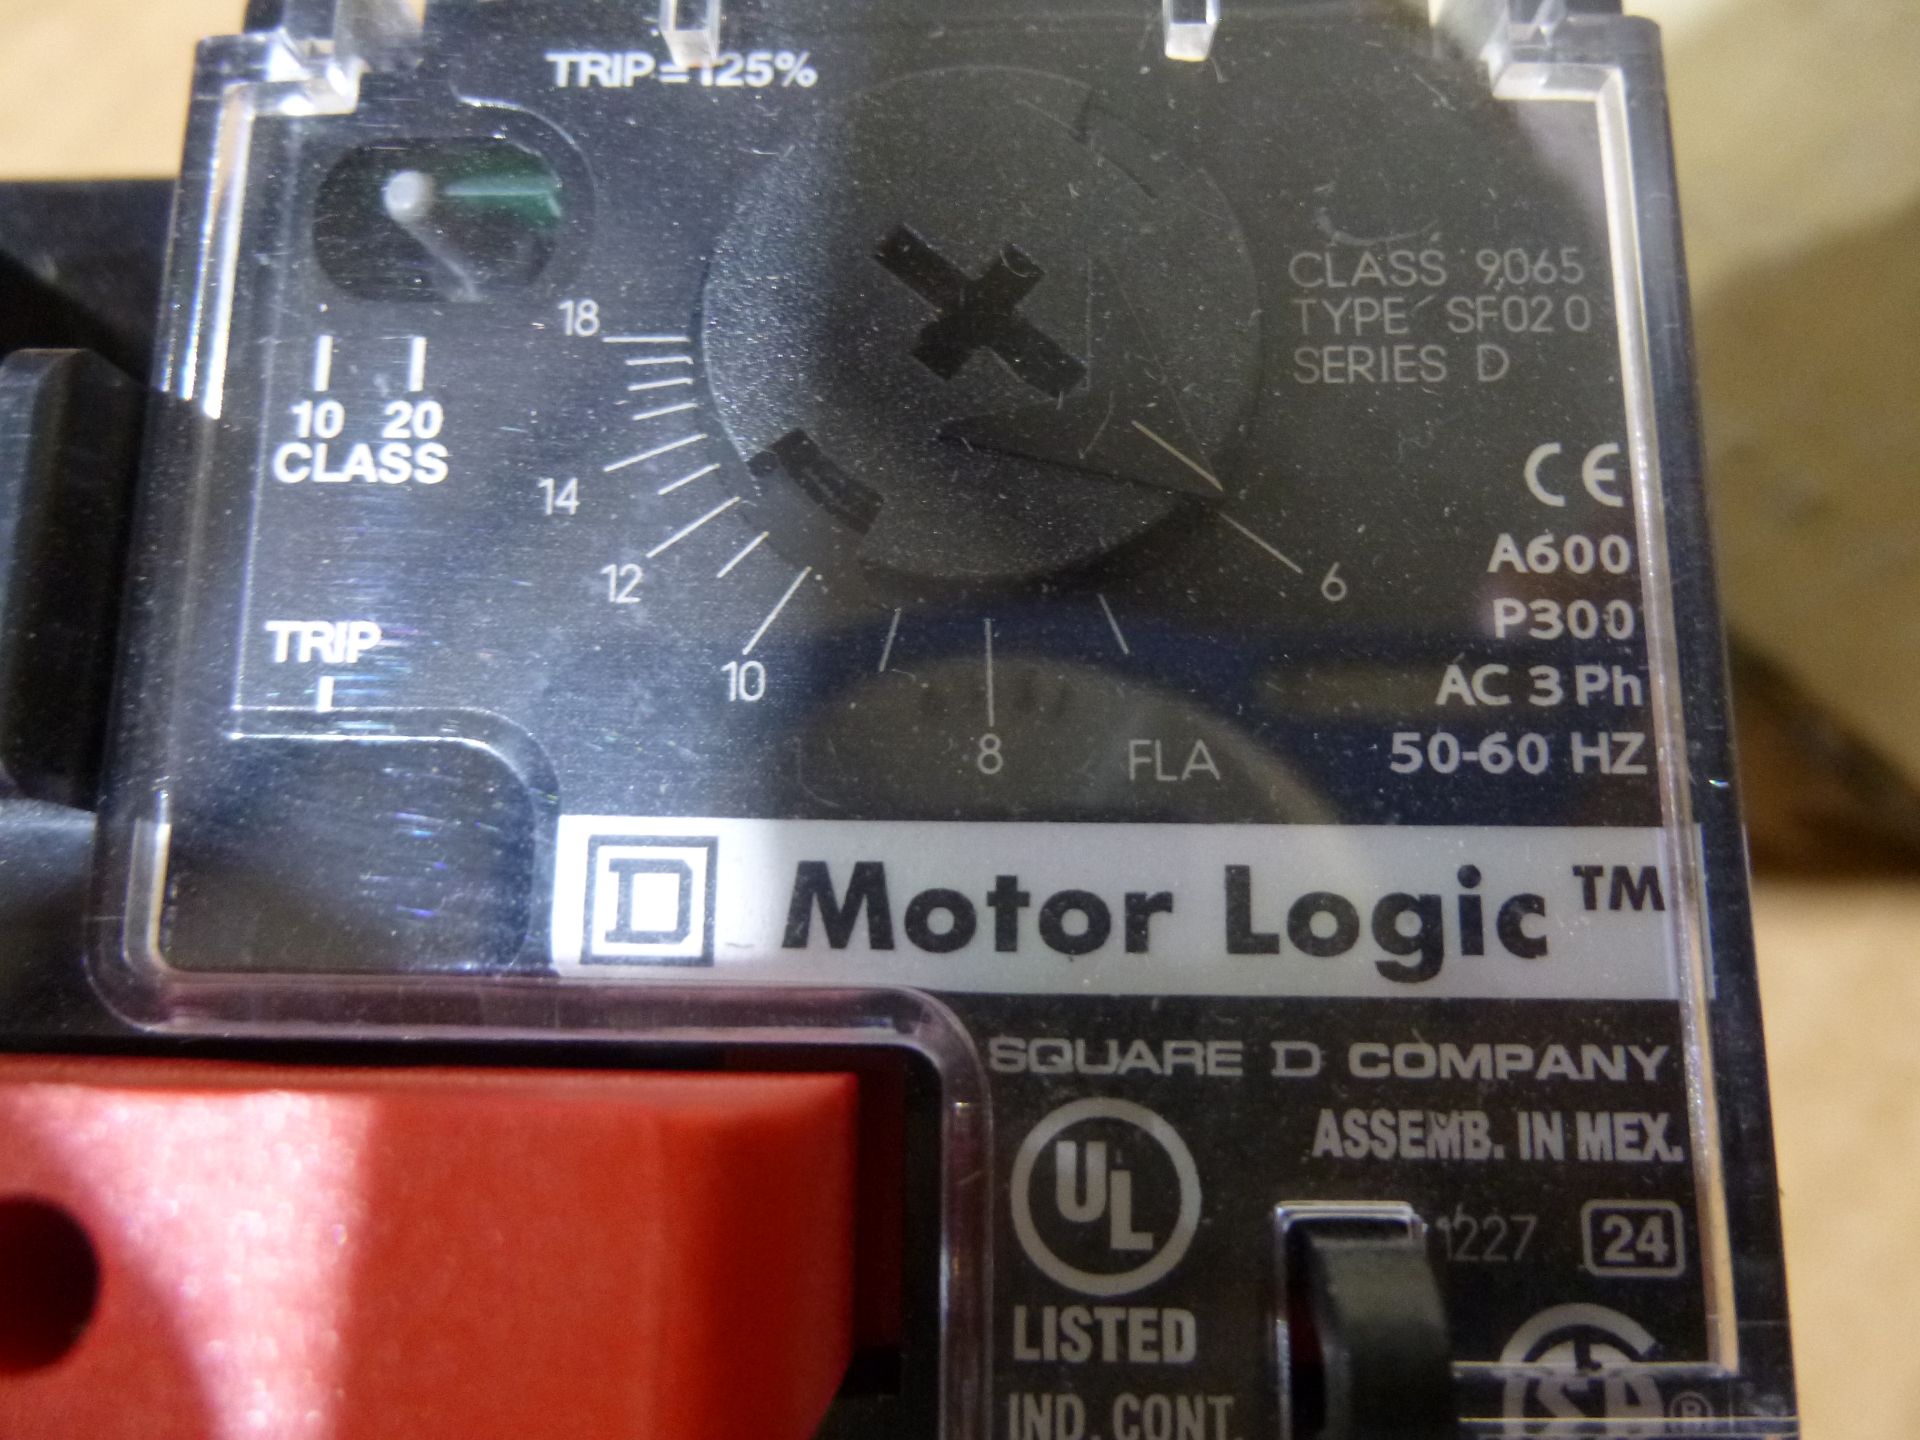 Qty 4 Square D motorlogic model number 9065sf020, appear to be new without box, as always with - Image 2 of 2